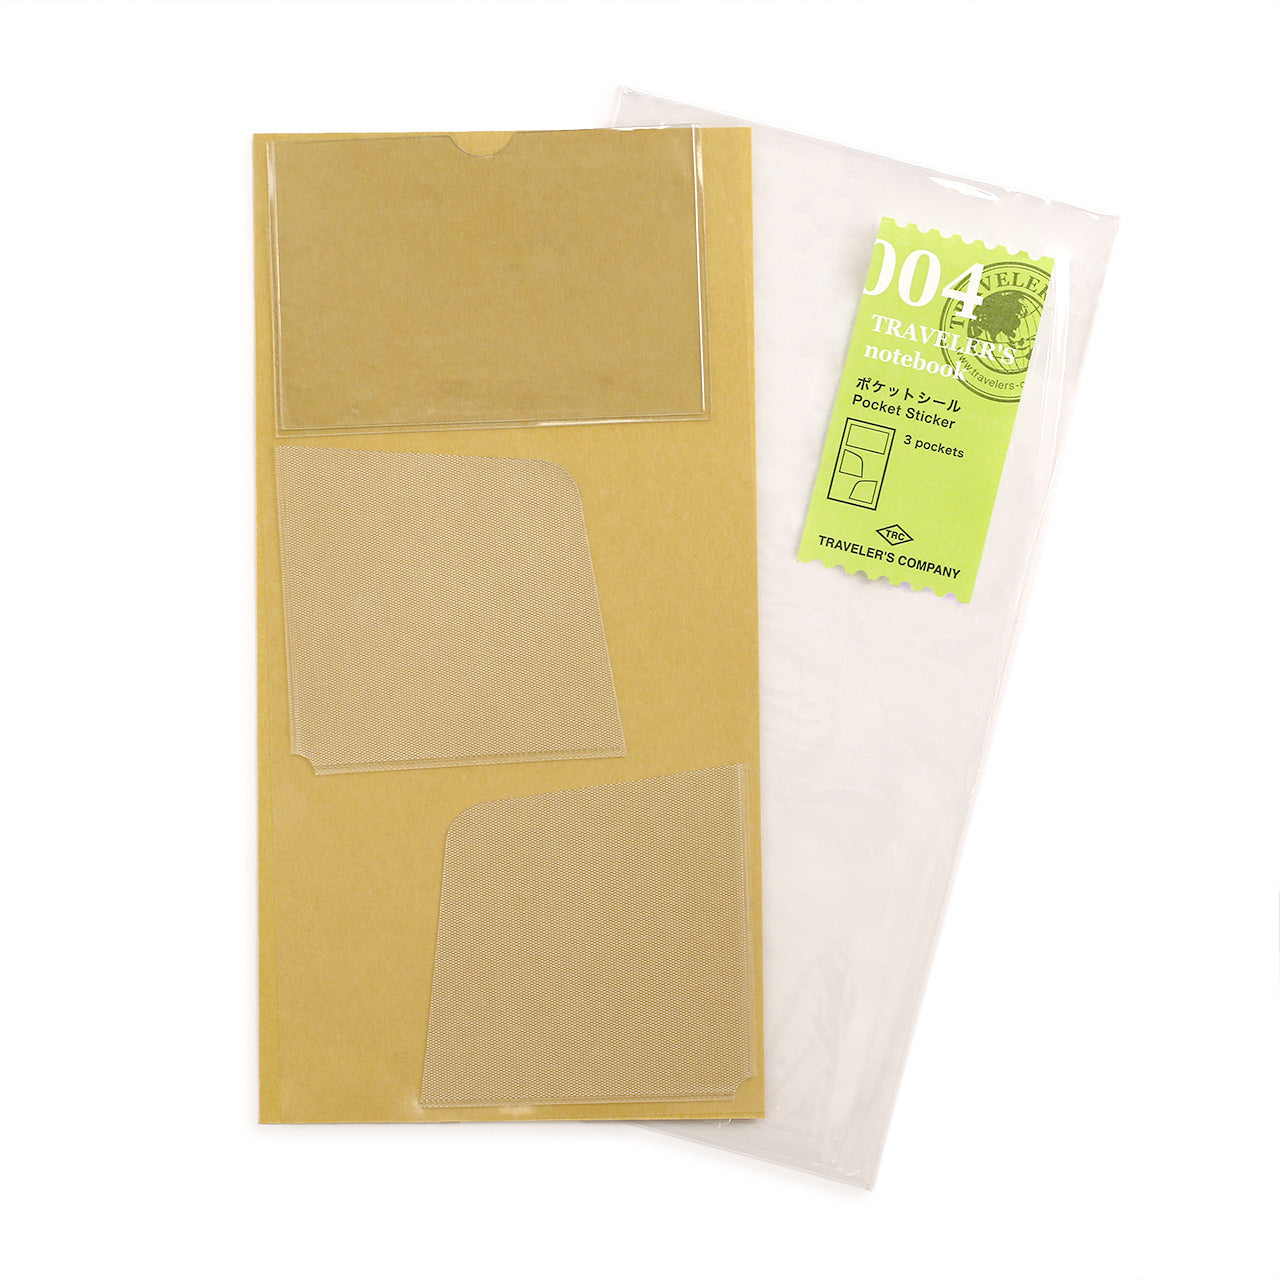 3 self-adhesive pockets  with green label 004 for regular sized travelers notebooks